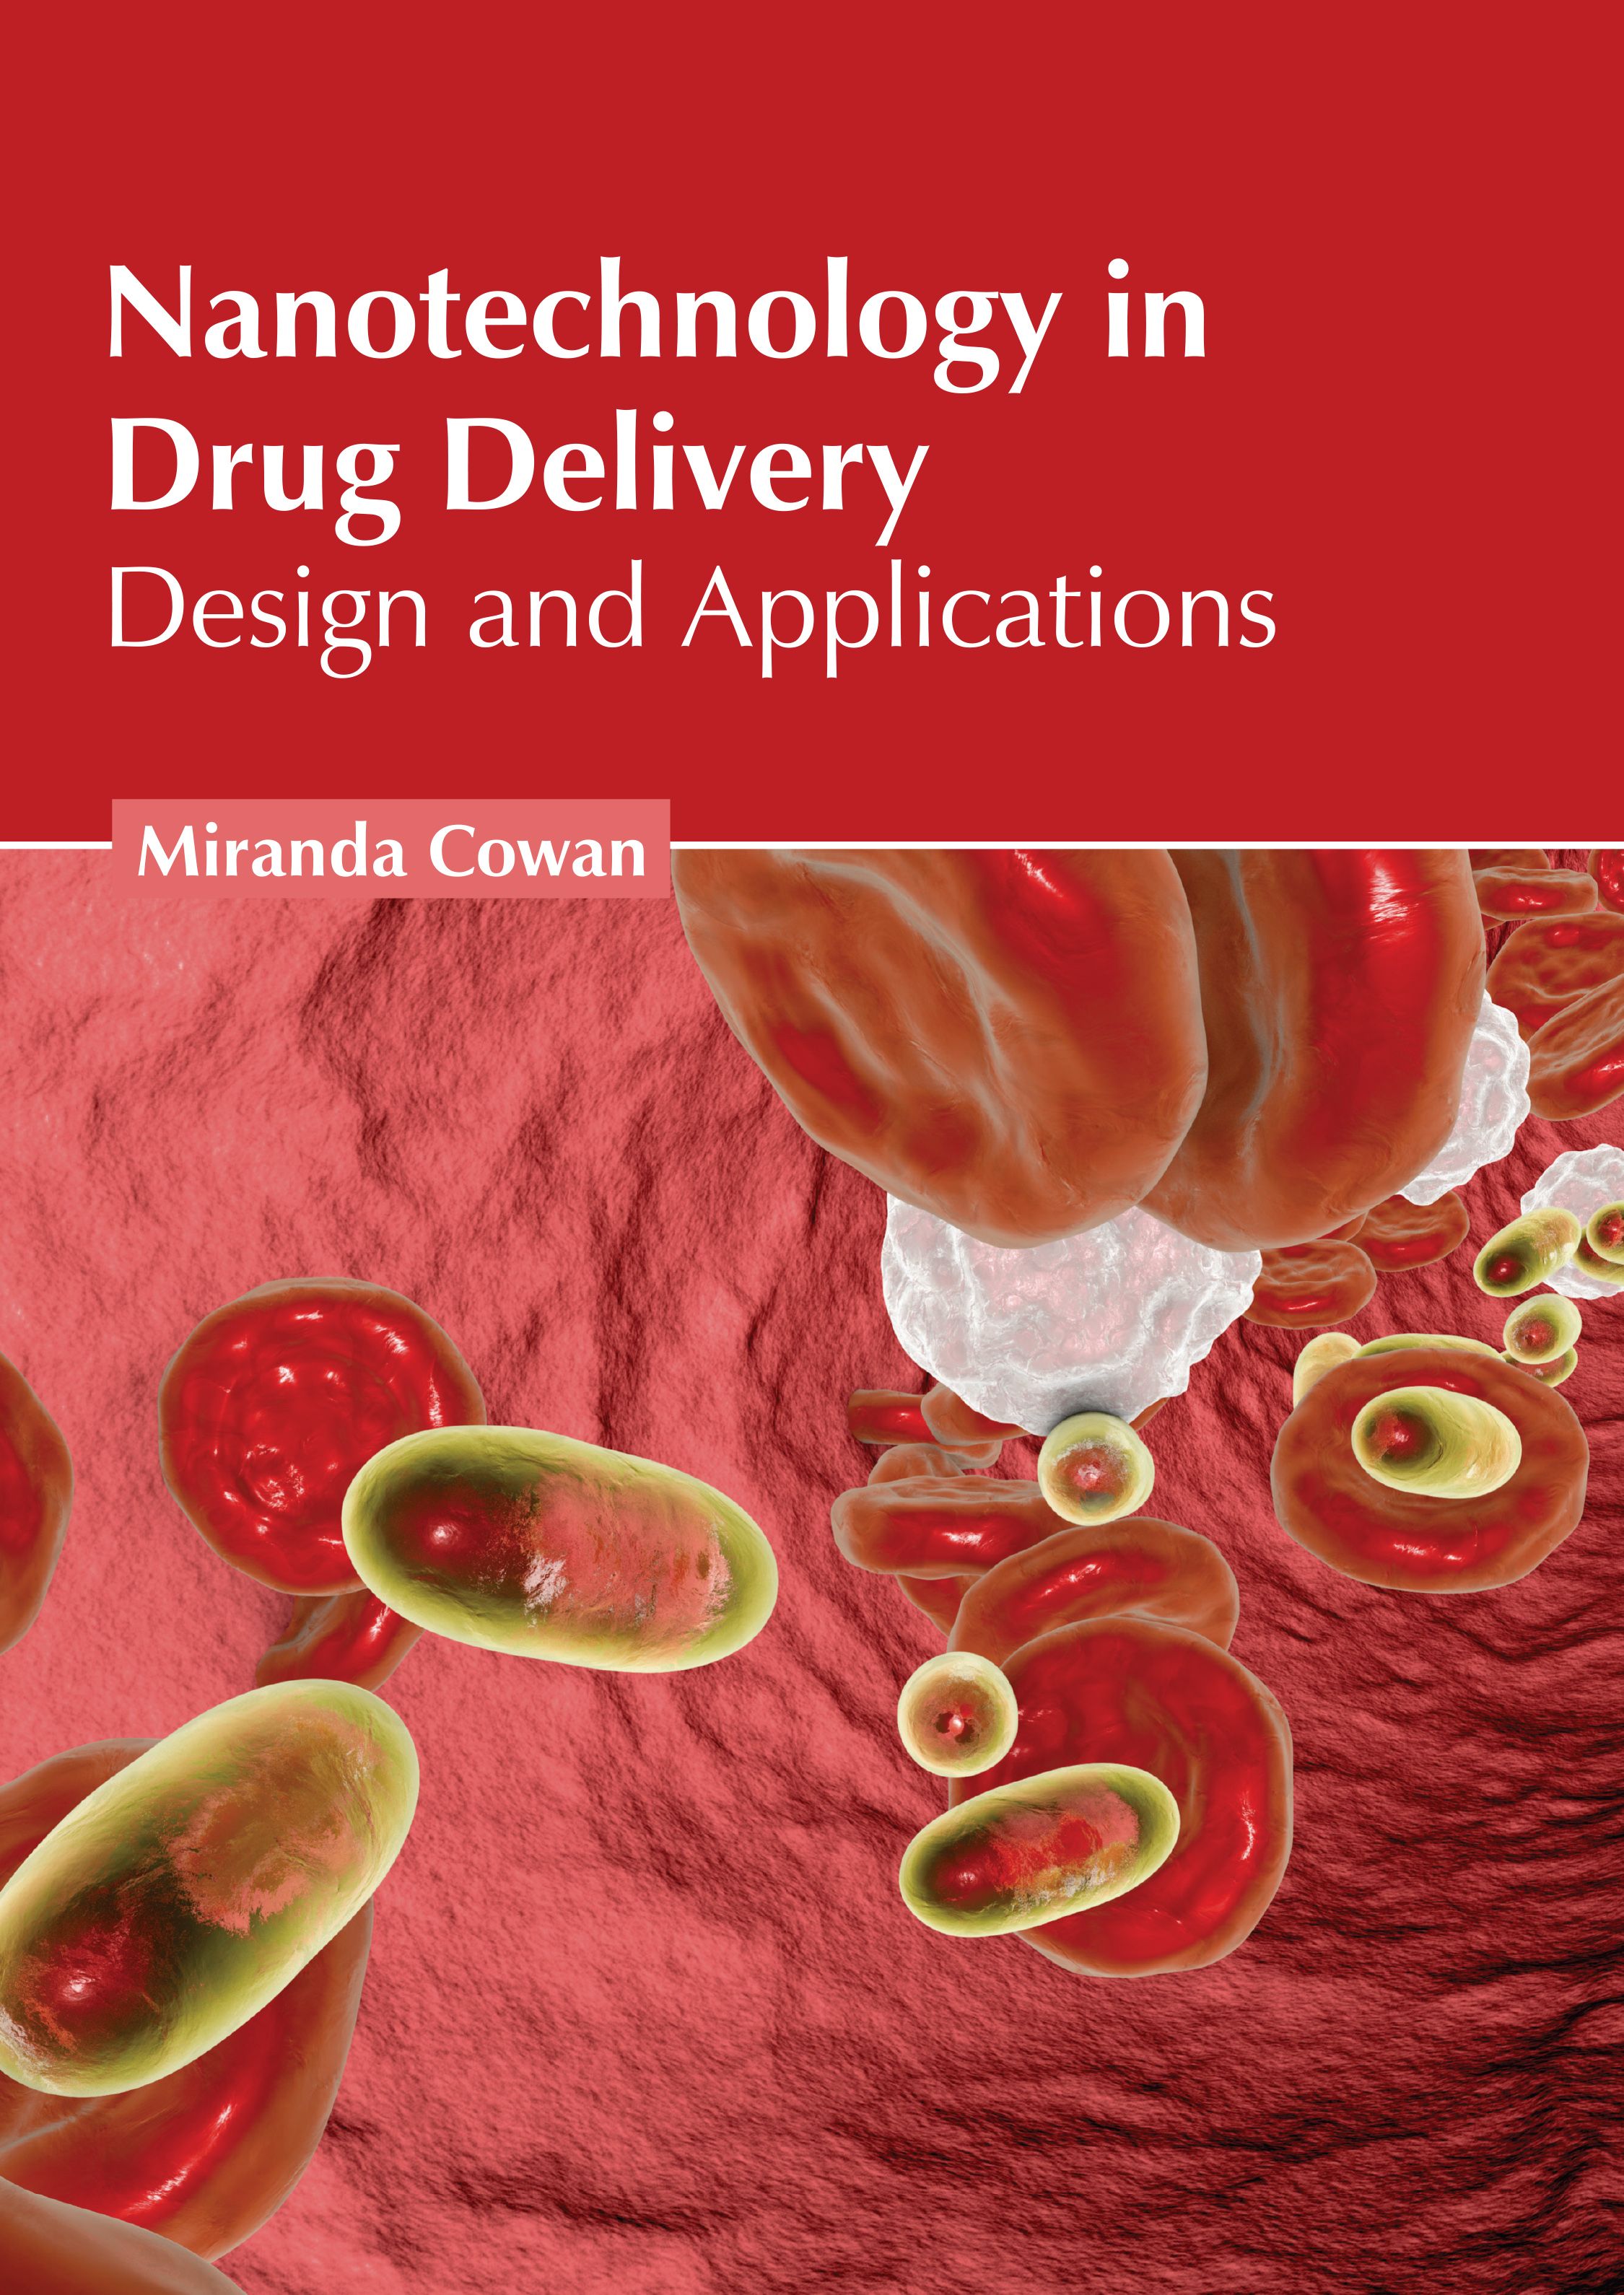 NANOTECHNOLOGY IN DRUG DELIVERY: DESIGN AND APPLICATIONS